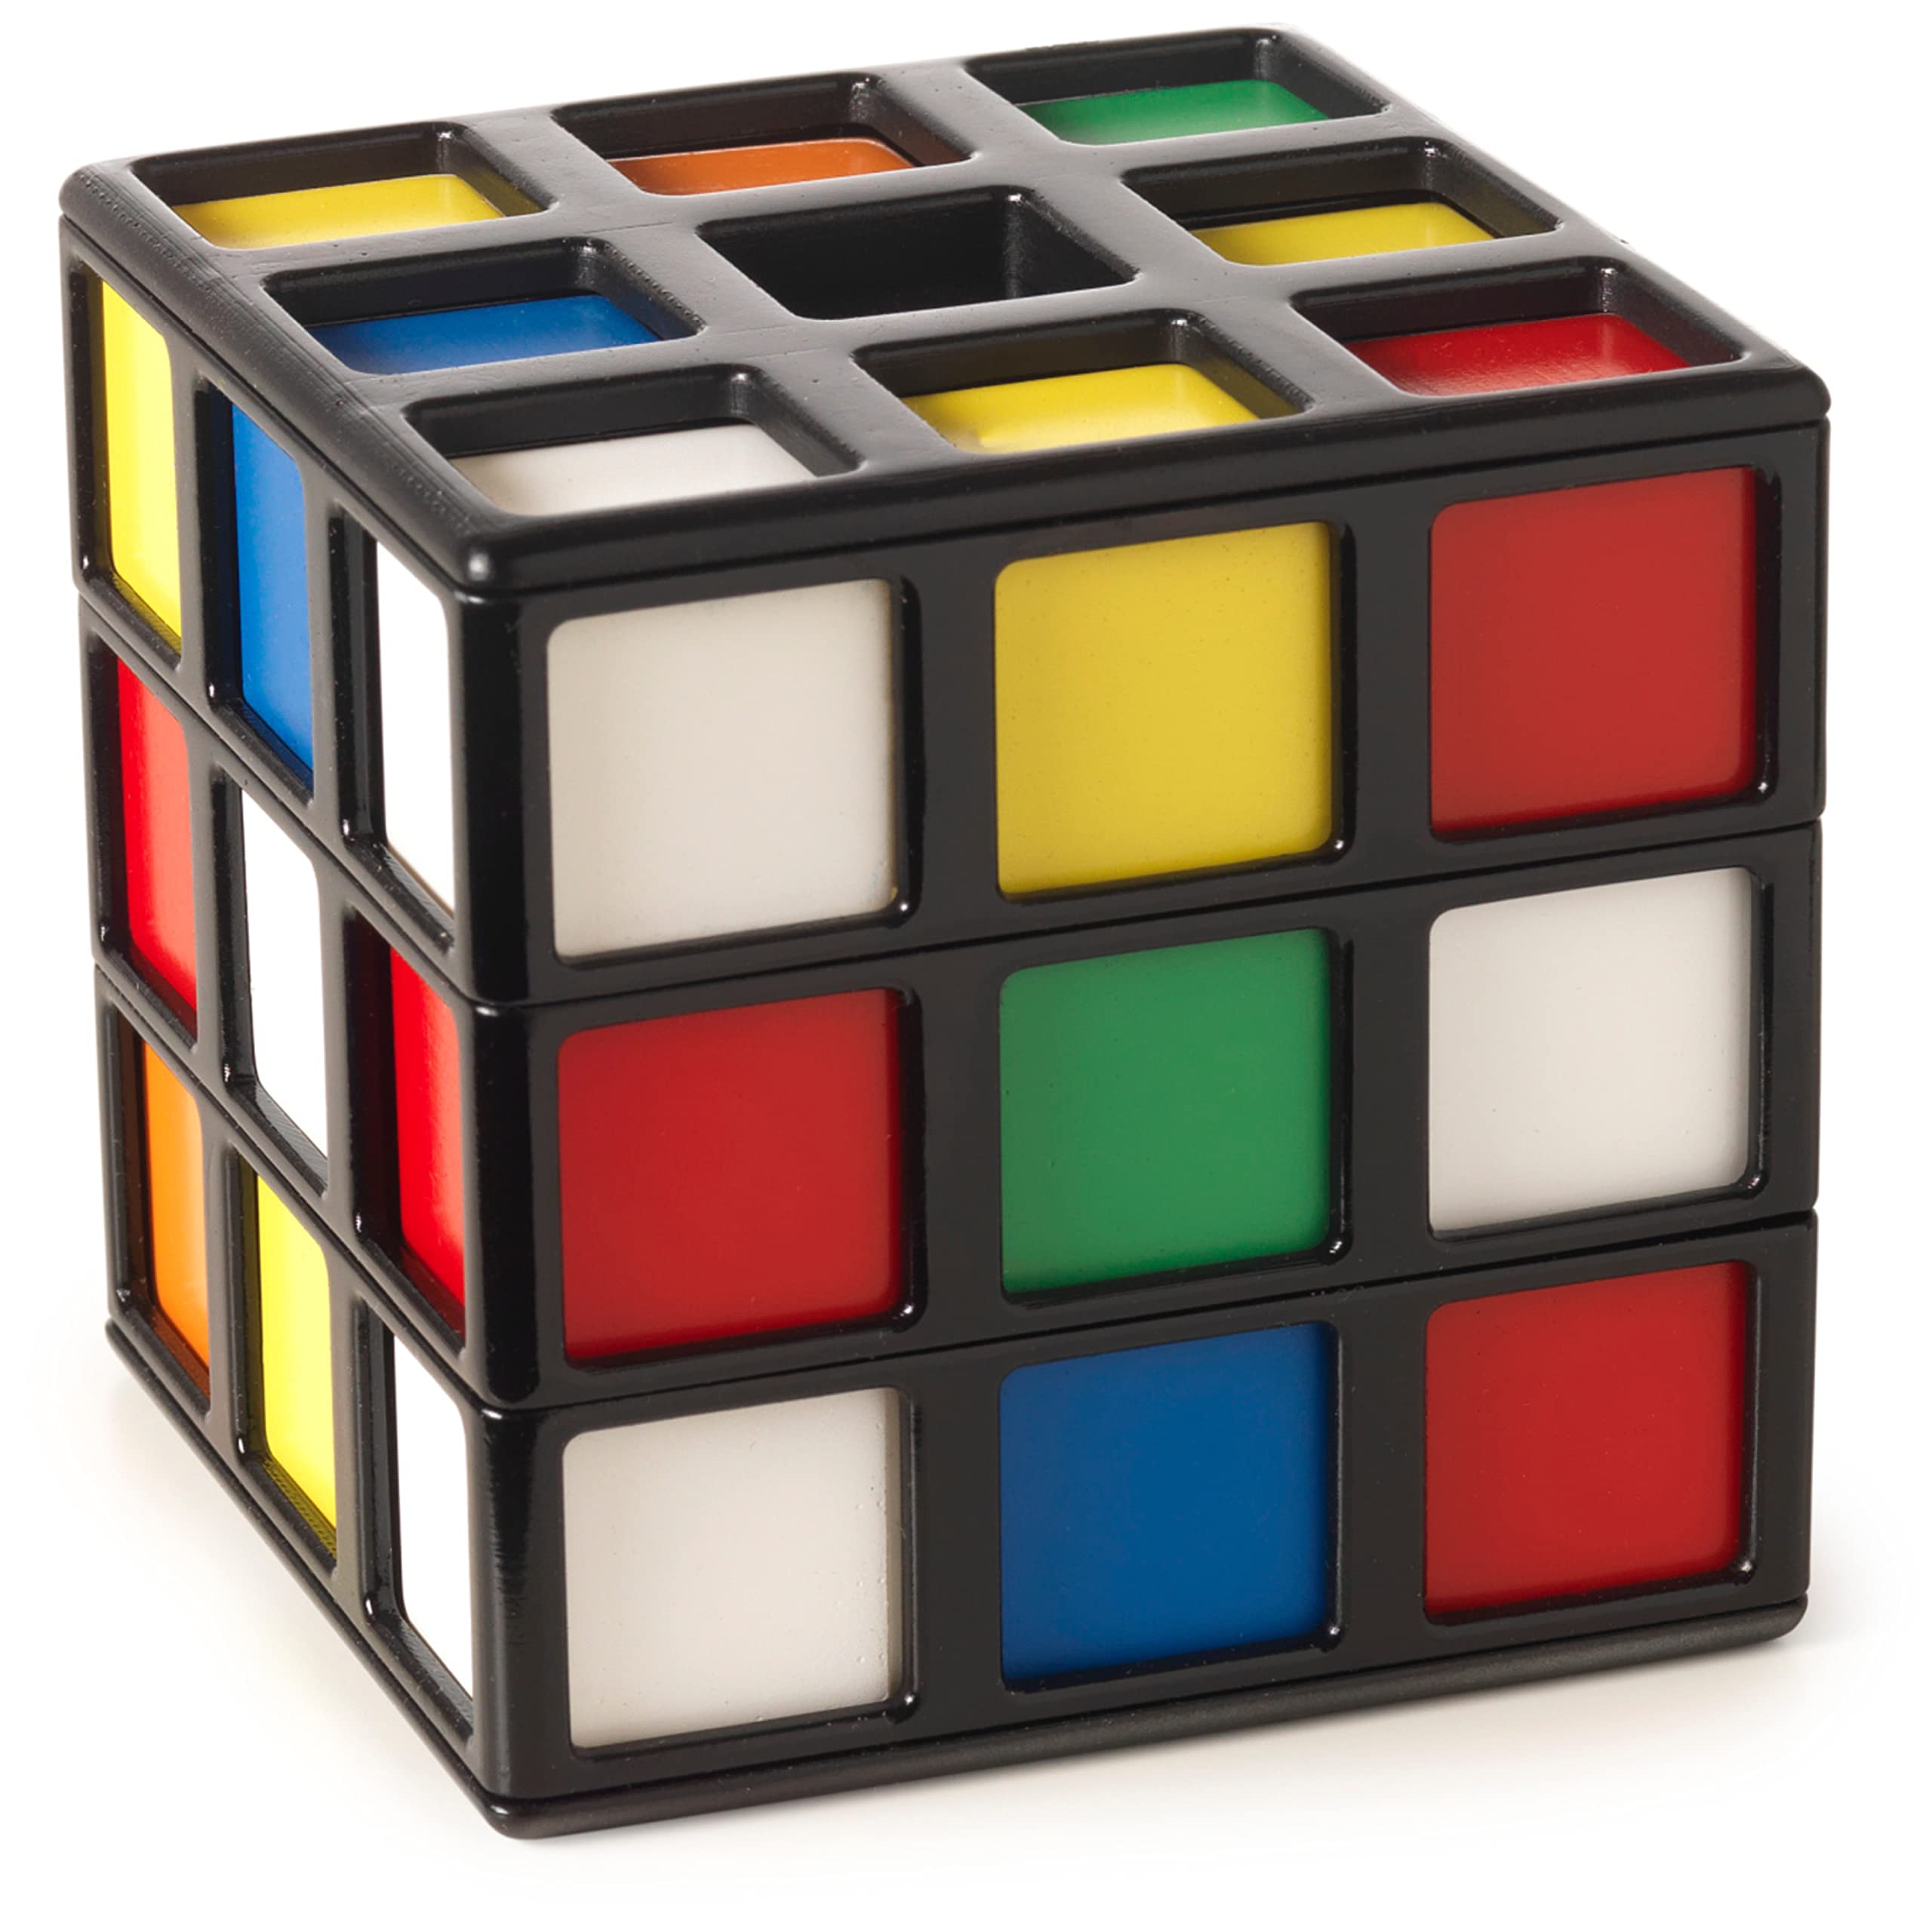 Rubik’s Cage, 3D Fast-Paced Strategy Sequence Game Color Stacking Challenging Toy Puzzle-Solving Activity Brain, for Adults & Kids Ages 7 and up